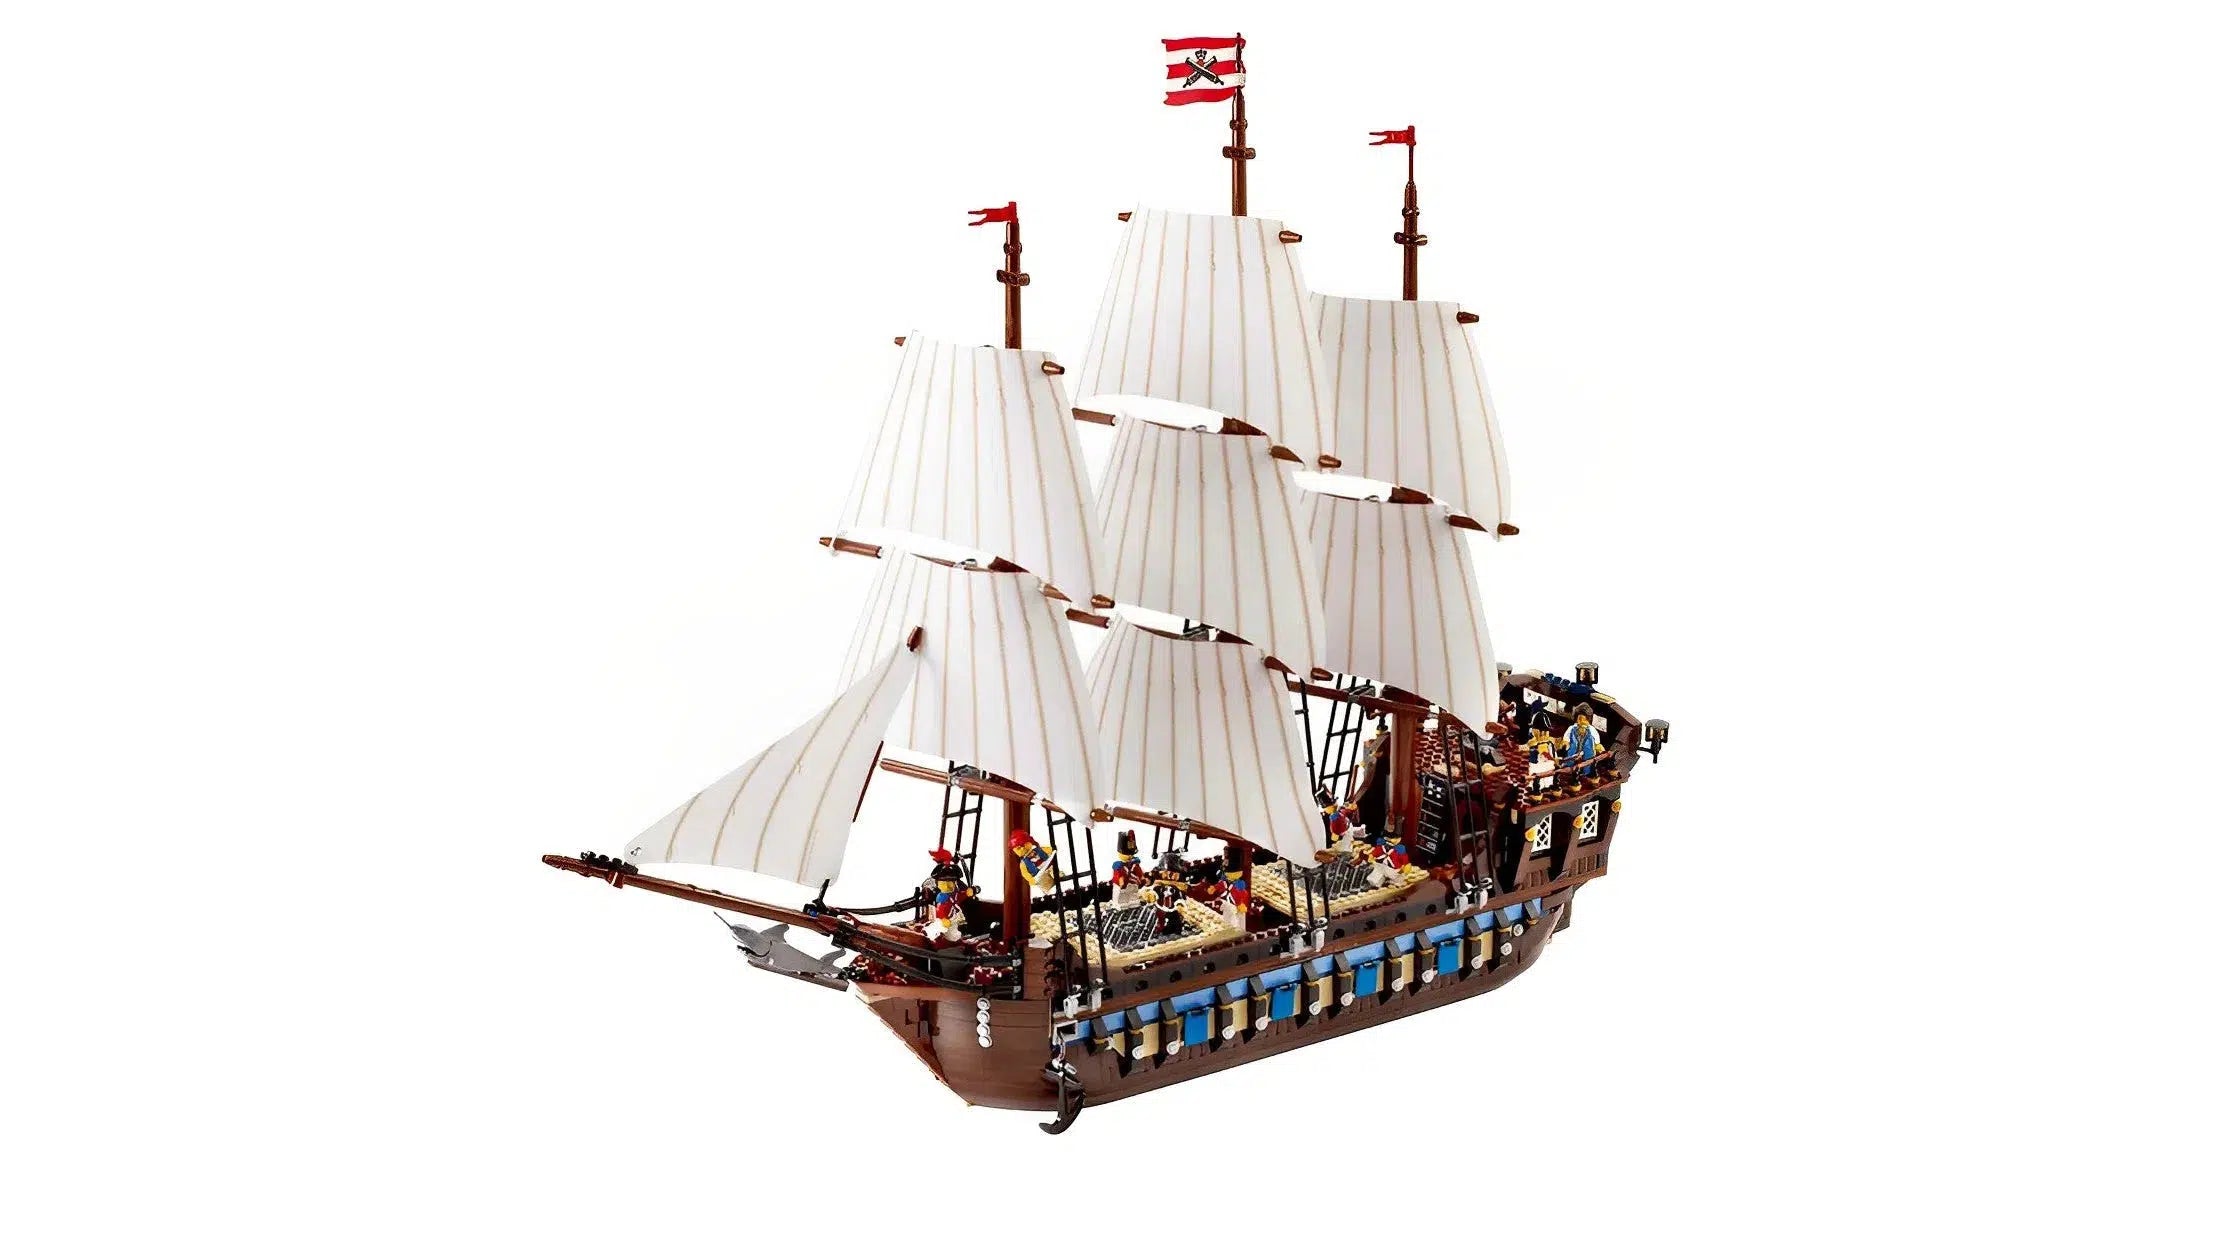 LEGO Imperial Flagship - The Biggest LEGO Ship Ever